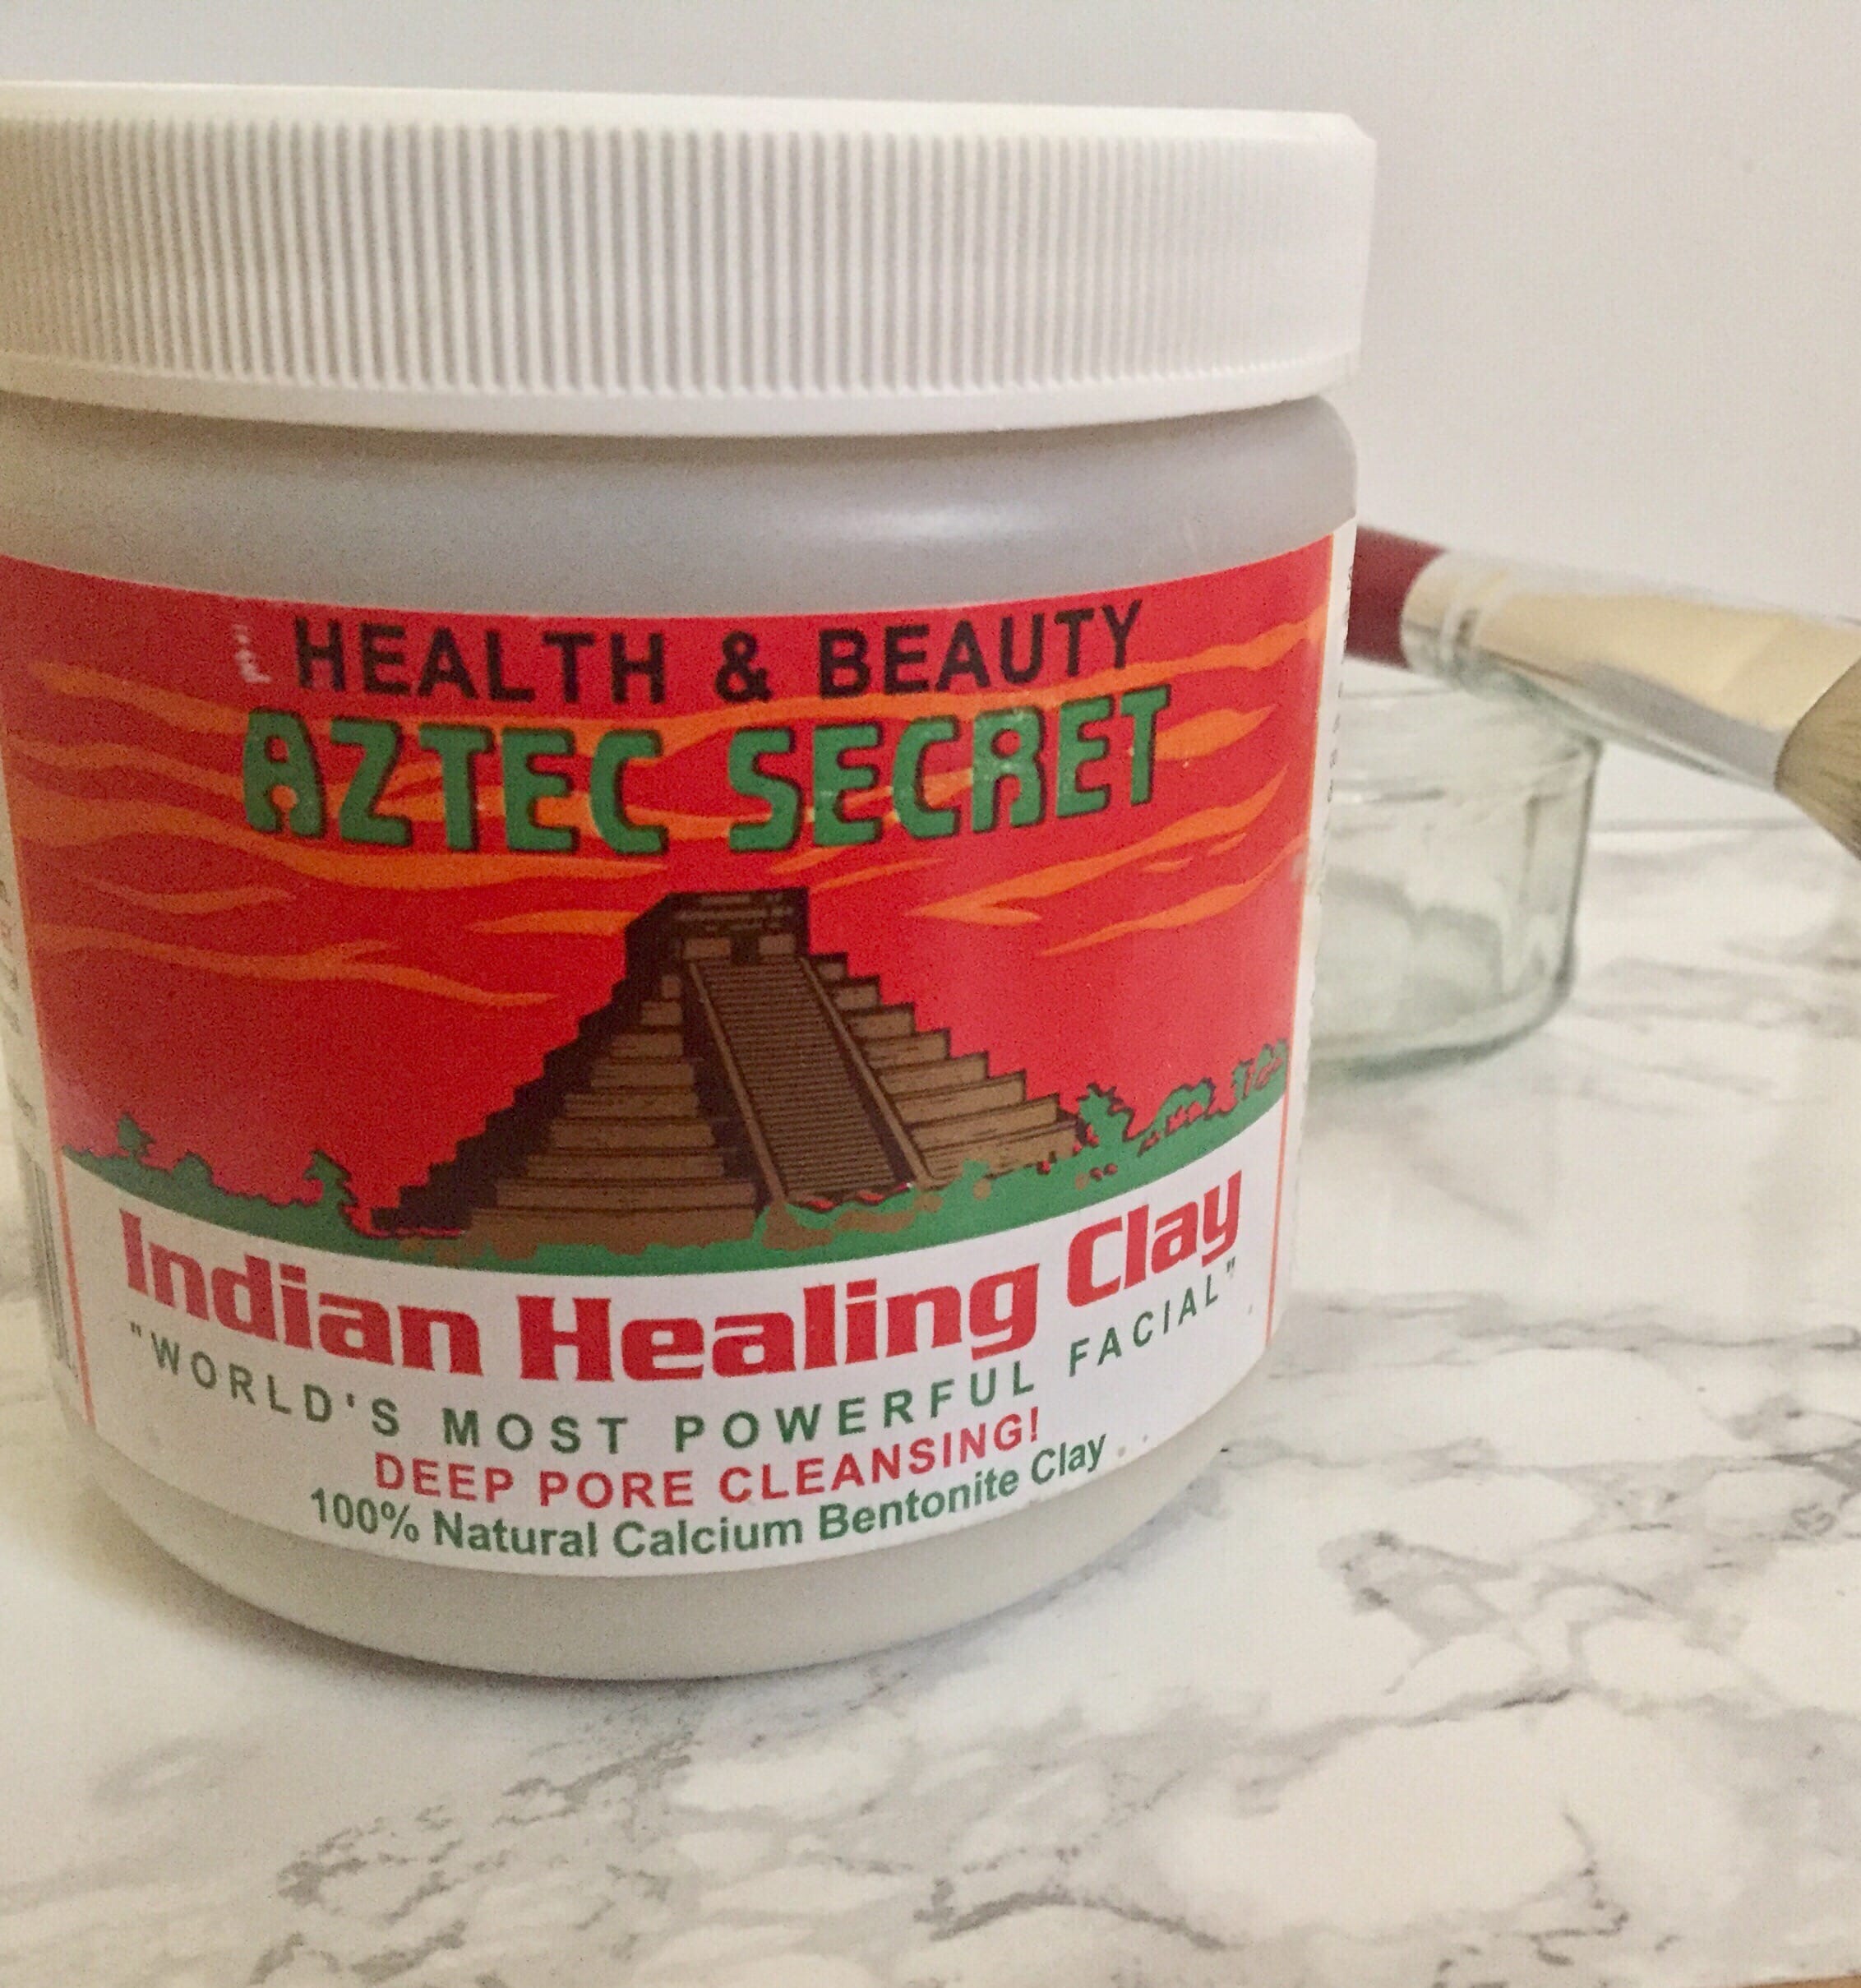 Aztec Secrets Indian healing clay Review: The best acne cure?